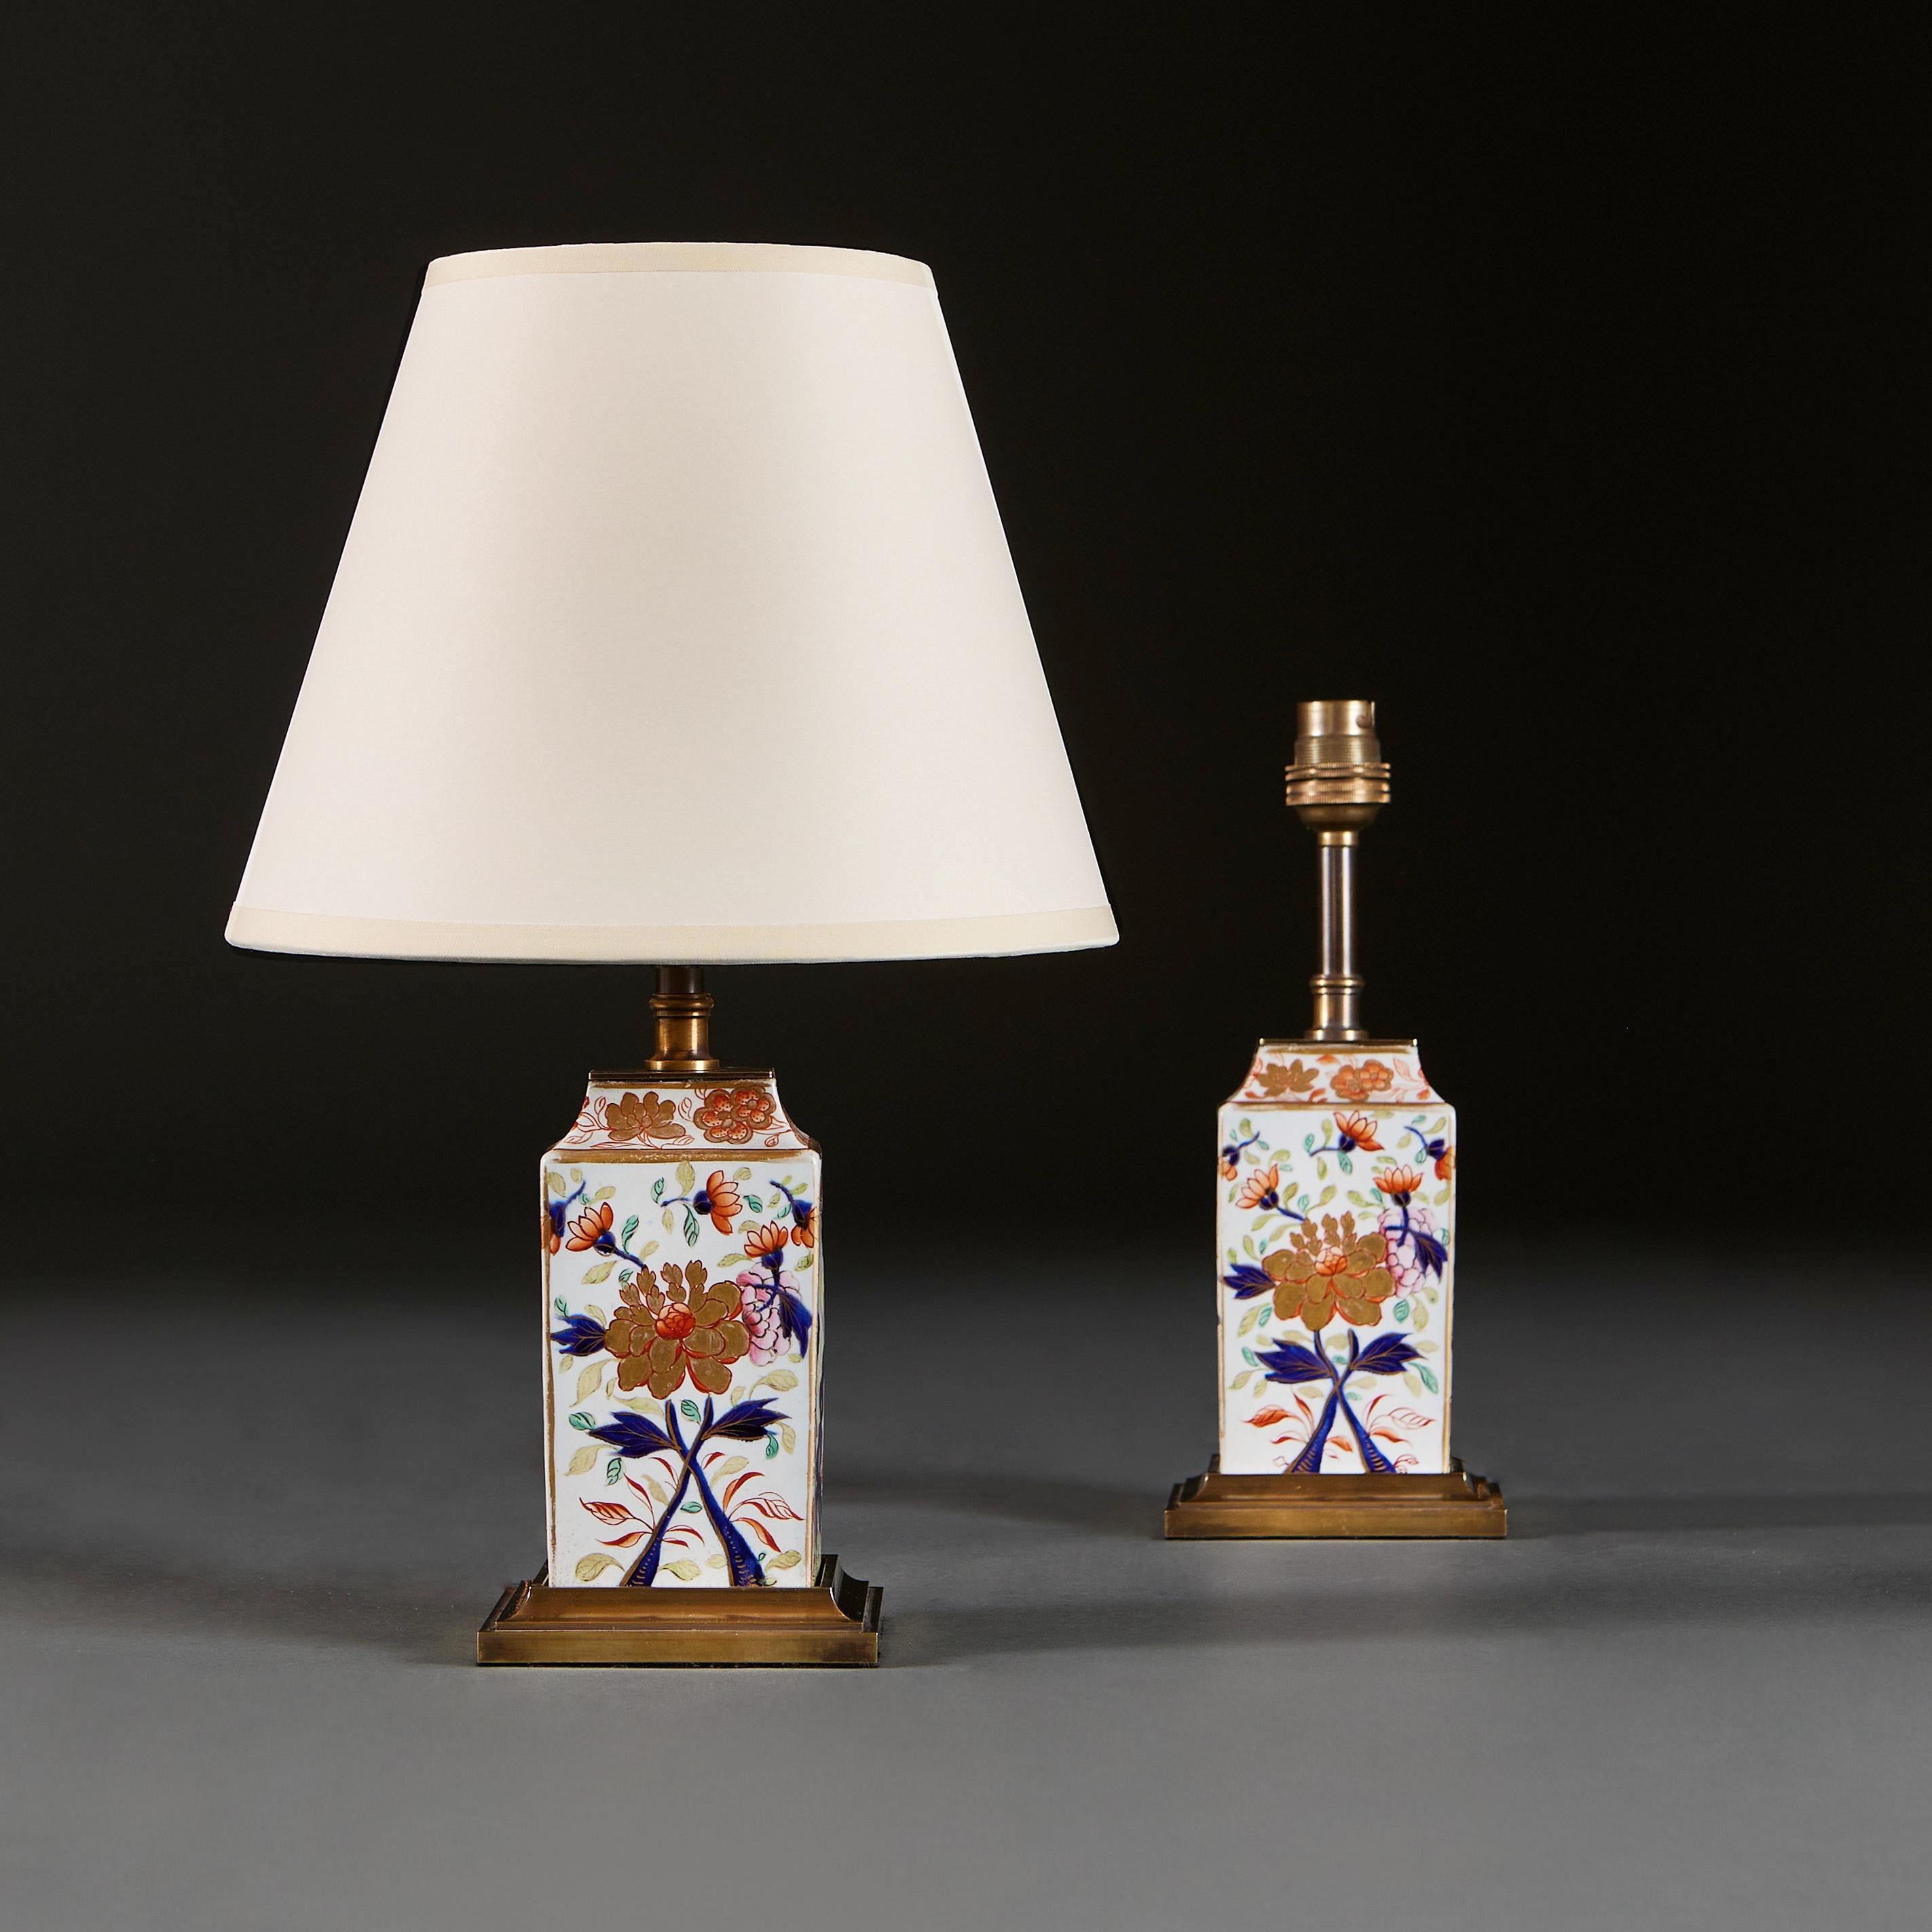 Japan, circa 1850

A pair of small mid 19th century Imari vases of square form, with oriental floral motives throughout, now mounted as lamps on brass plinth bases.

Height of vase 15.00cm
Height with shade 34.00cm
Width of base